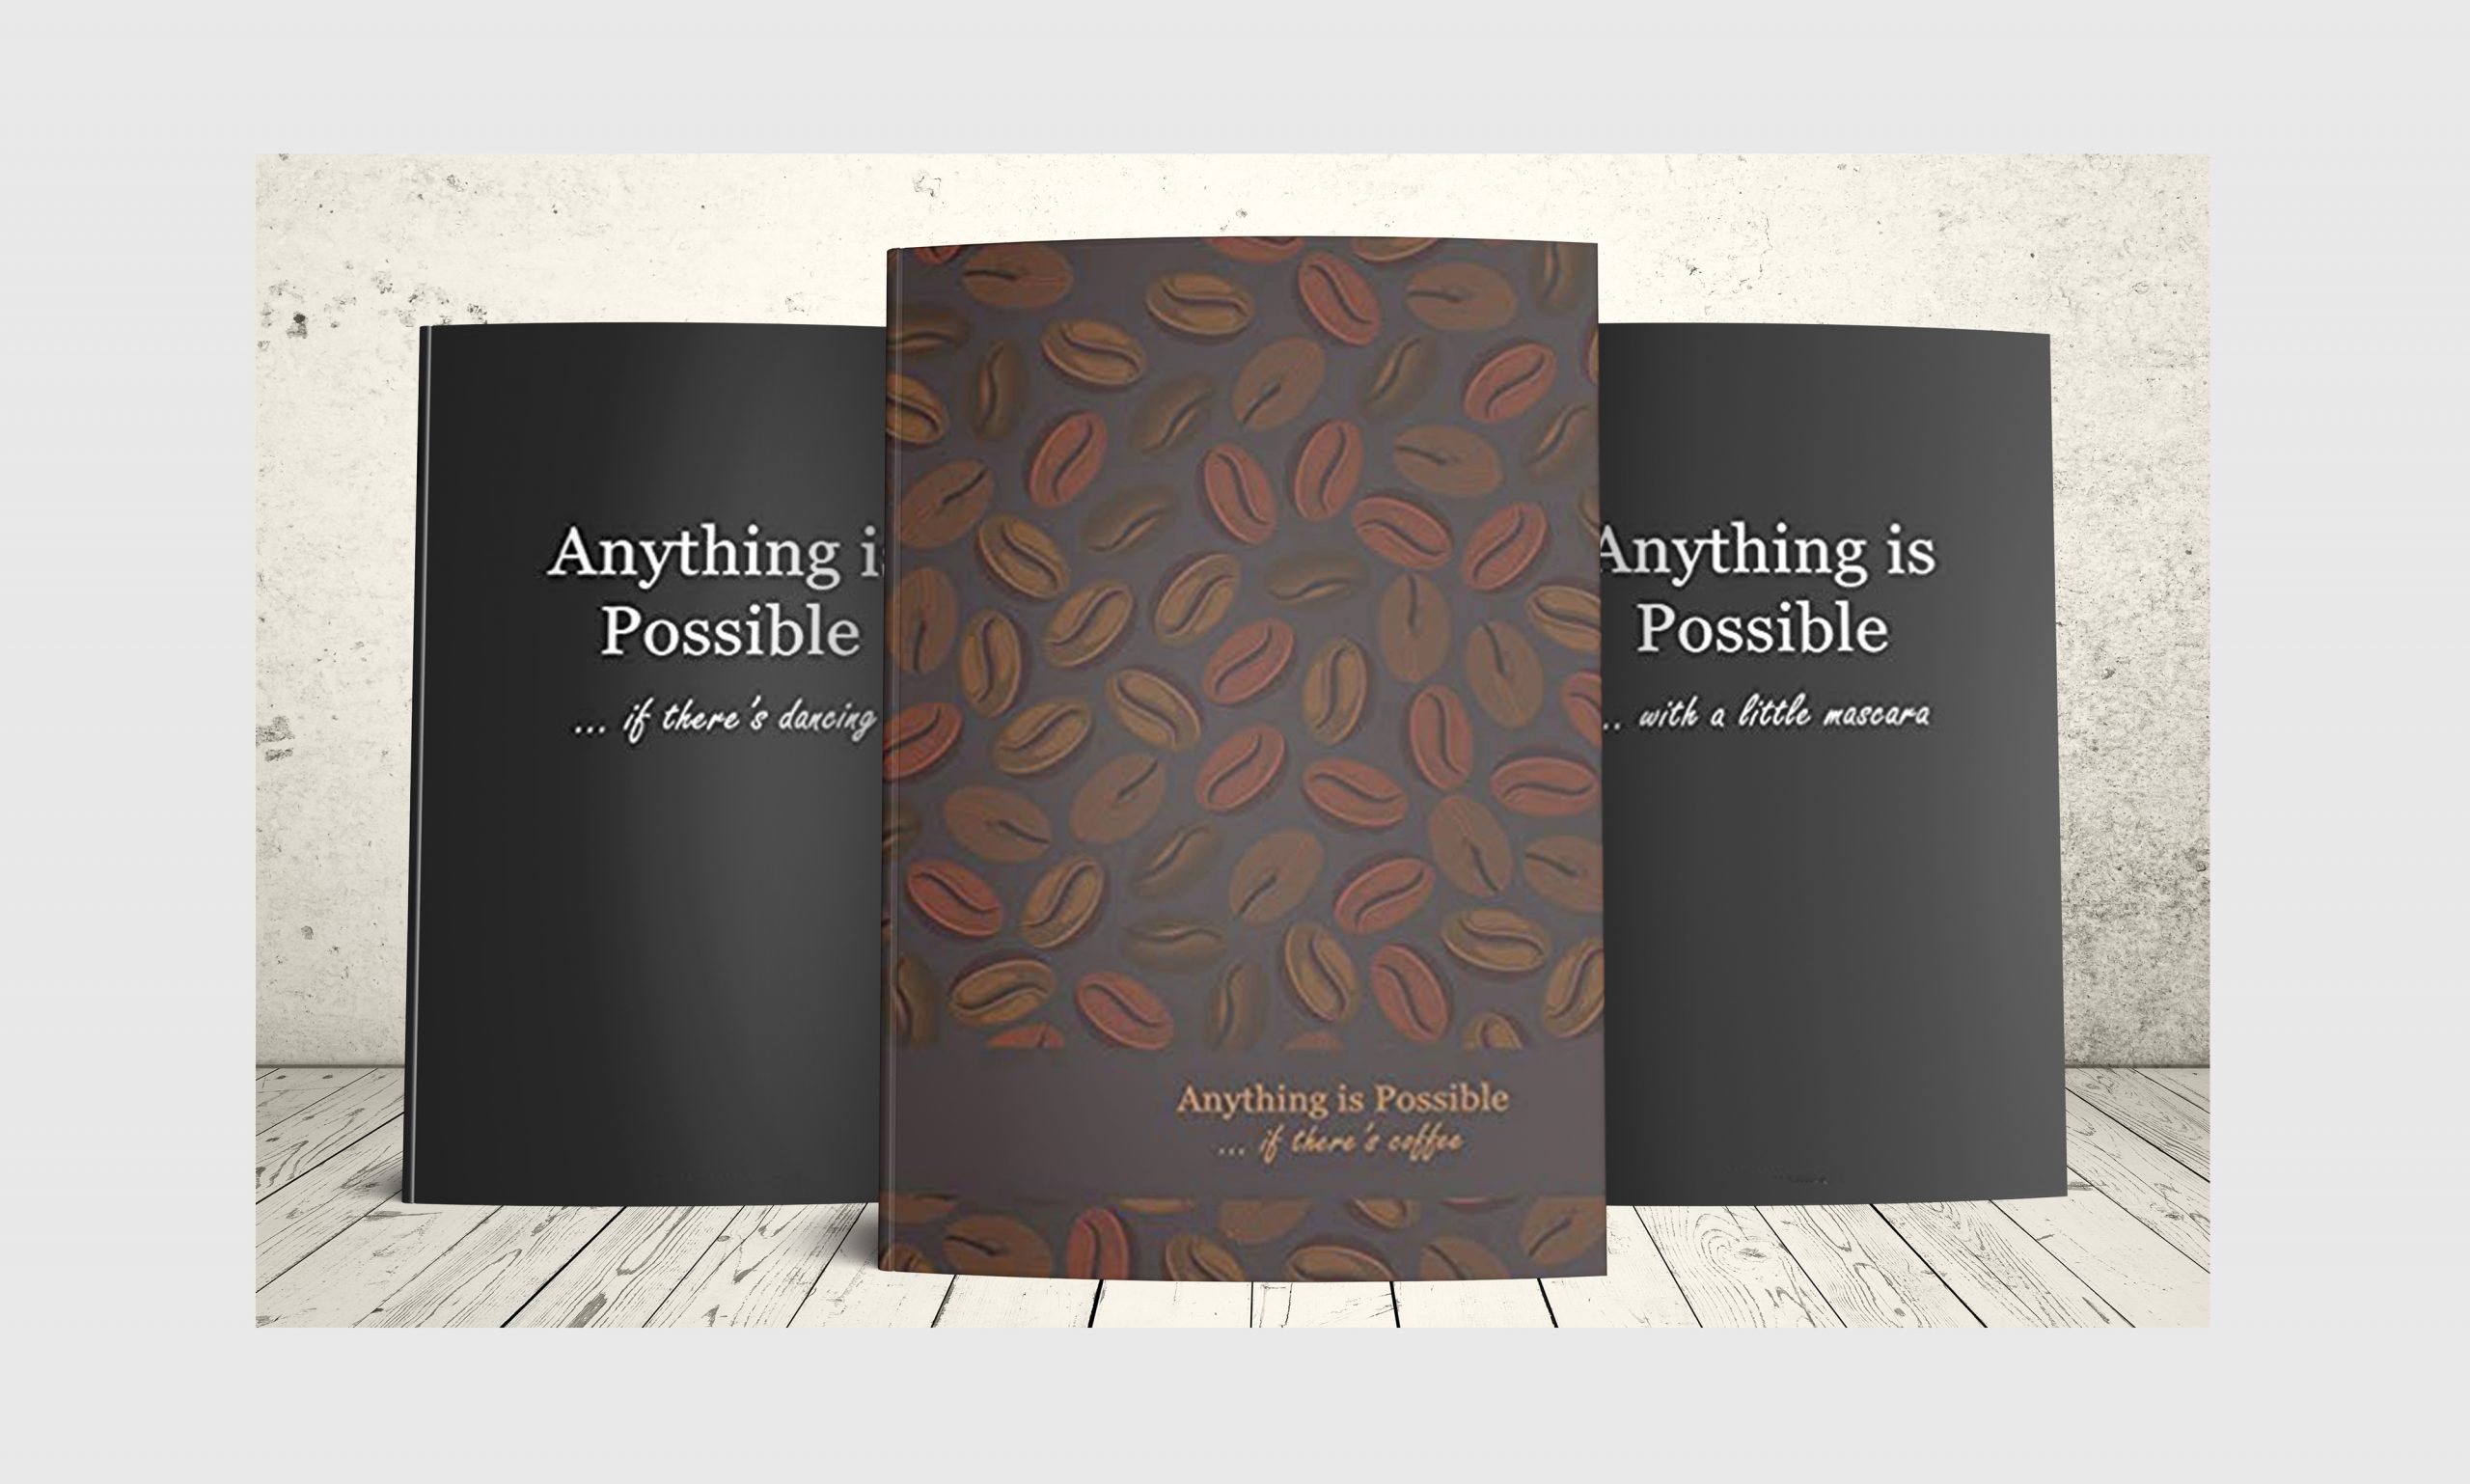 Three journals from the Anything is Possible series. Two are black with white text and one is an image of coffee beans with light brown text.